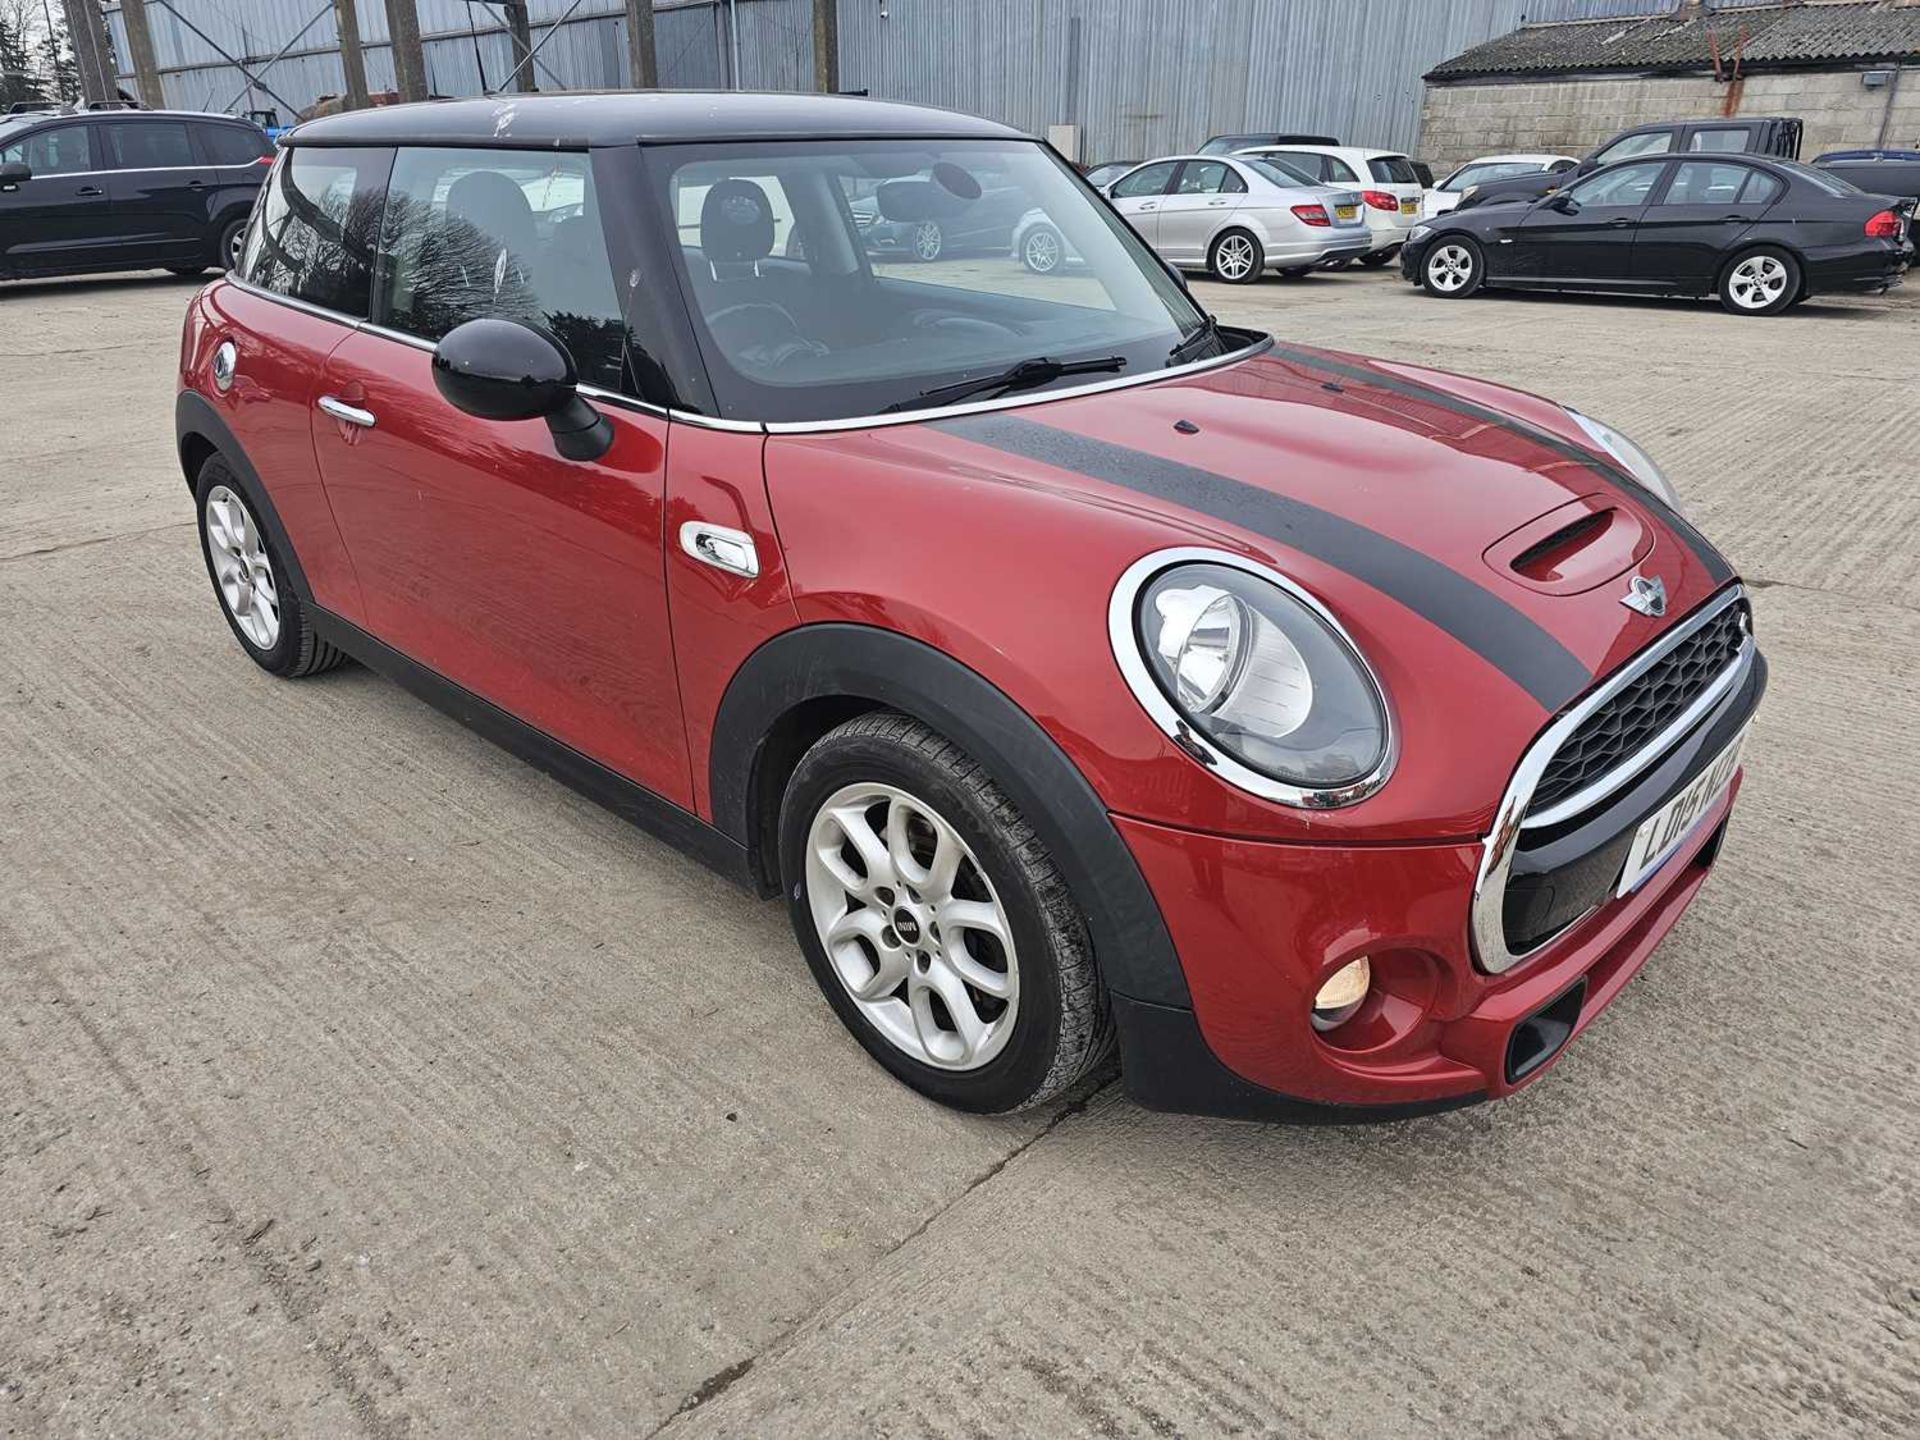 2015 Mini Cooper SD, 6 Speed, Half Leather, A/C (Reg. Docs. Available, Tested 01/25) - Image 4 of 29